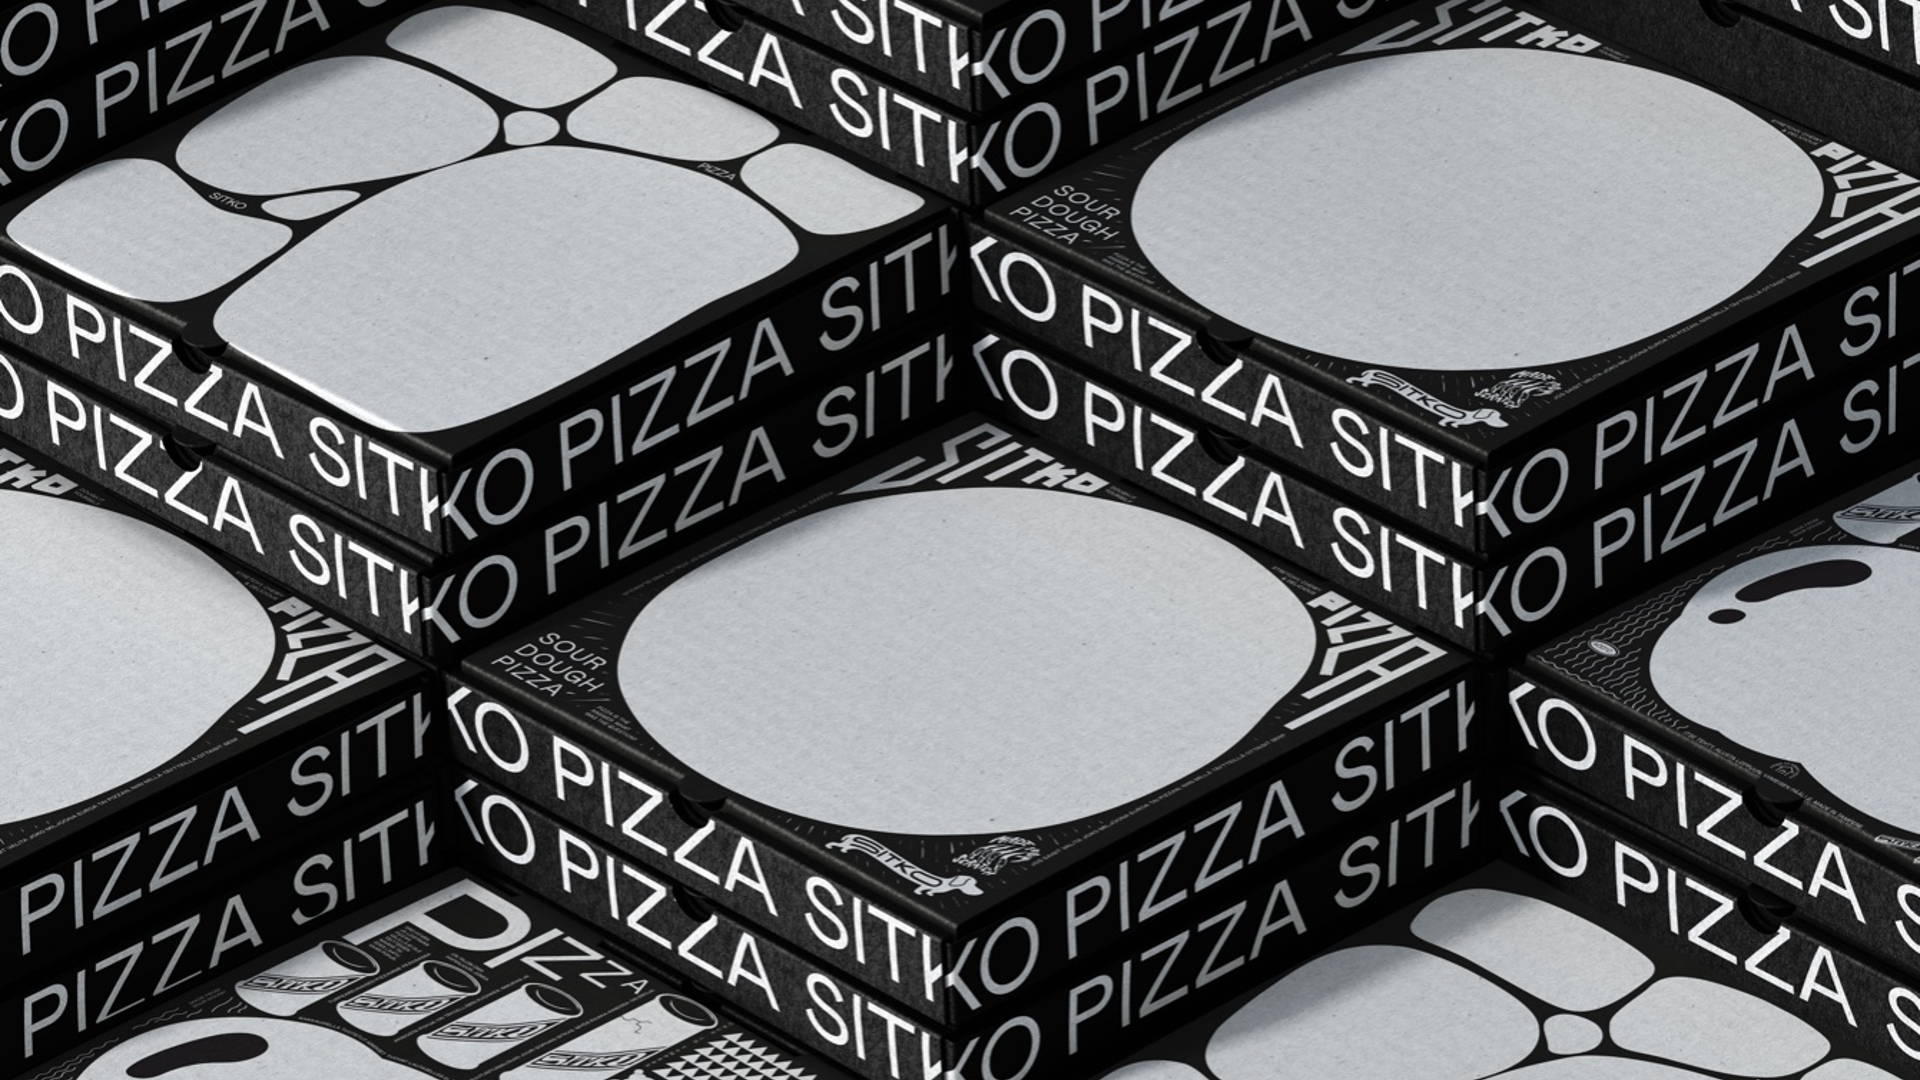 Featured image for Sitko Pizza's Packaging Takes It Back To The Basic